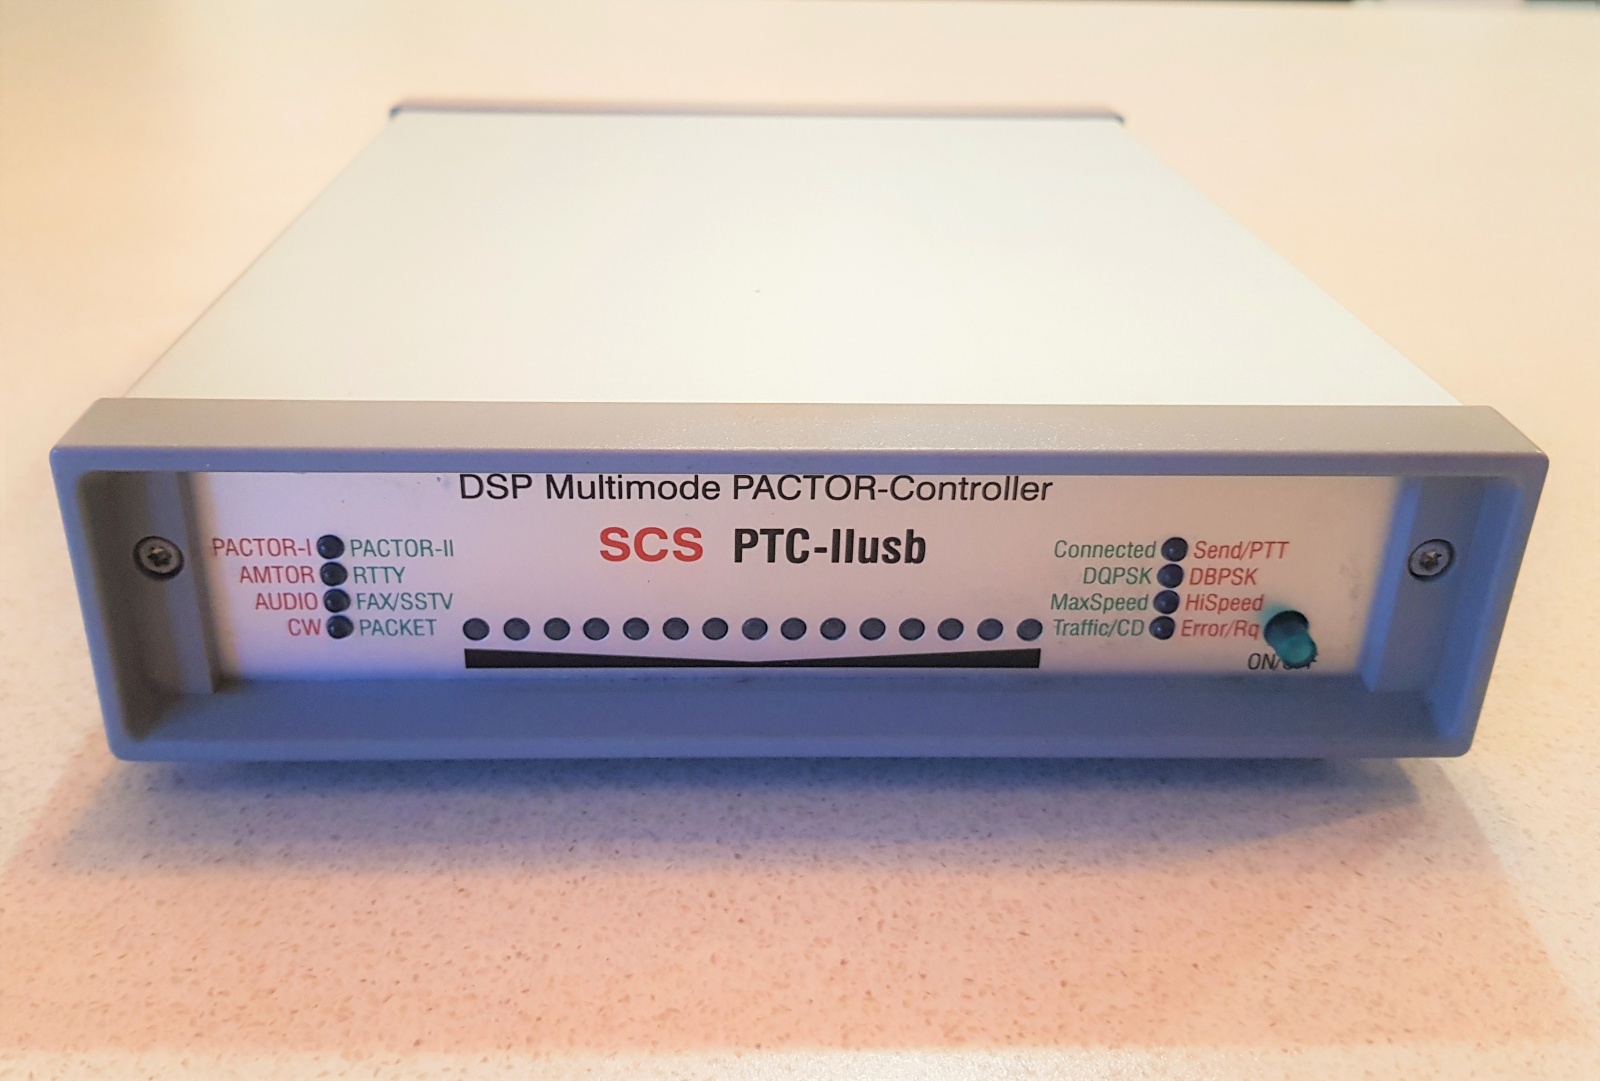 For Sale: SCS PTC-IIusb Modem with Pactor 3 Licence - Cruisers & Sailing  Forums